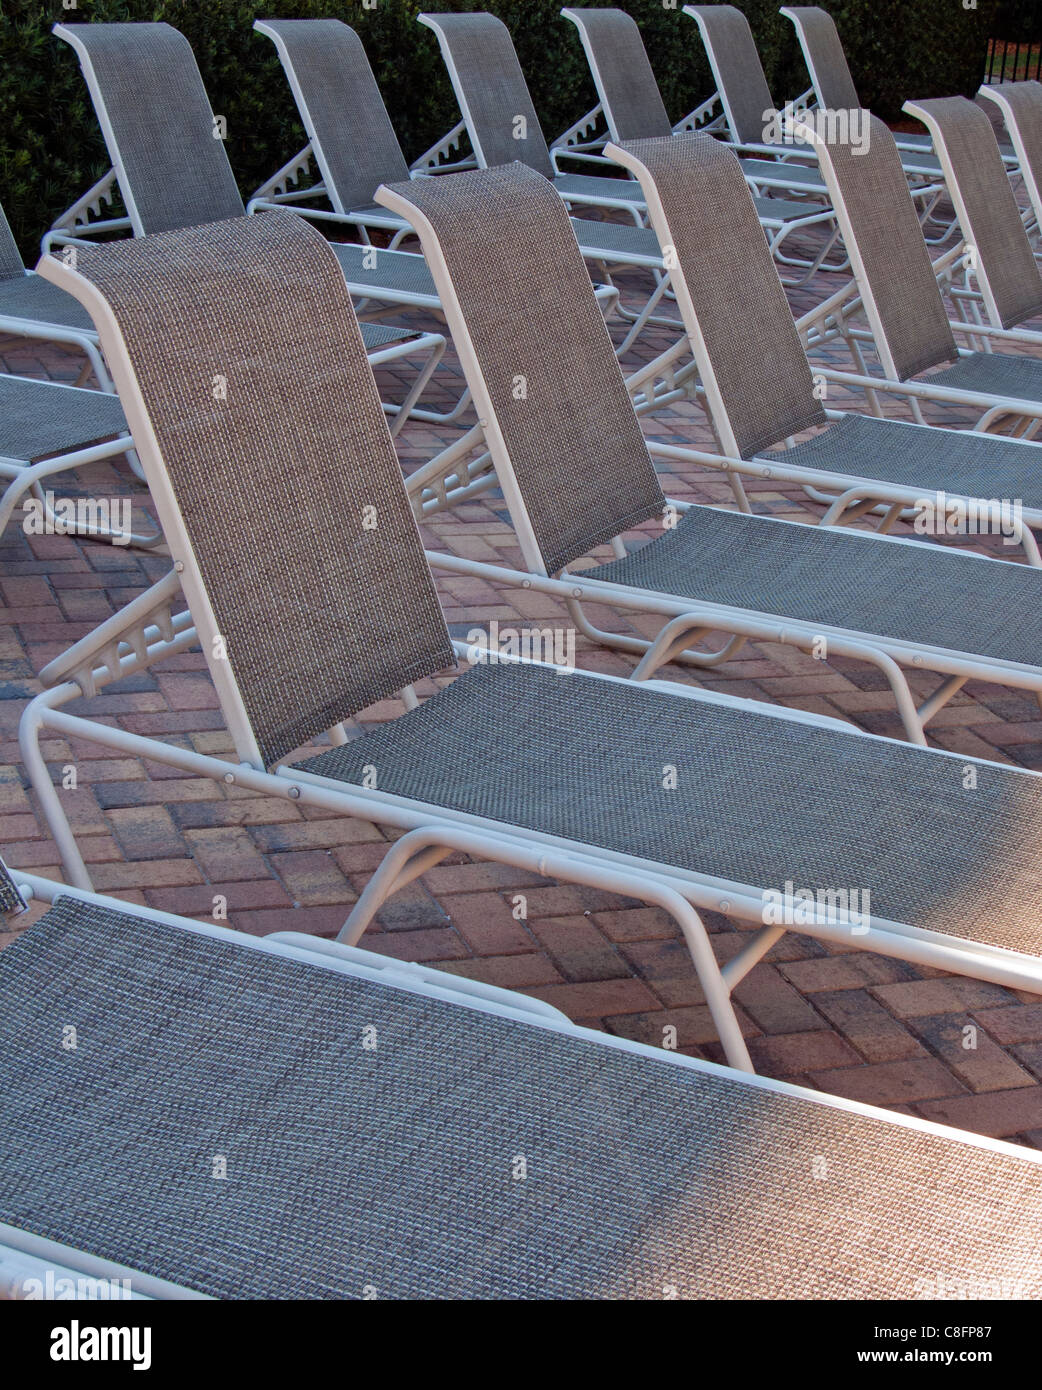 SHALLOW FOCUS IMAGE OF EMPTY SUNBEDS Stock Photo